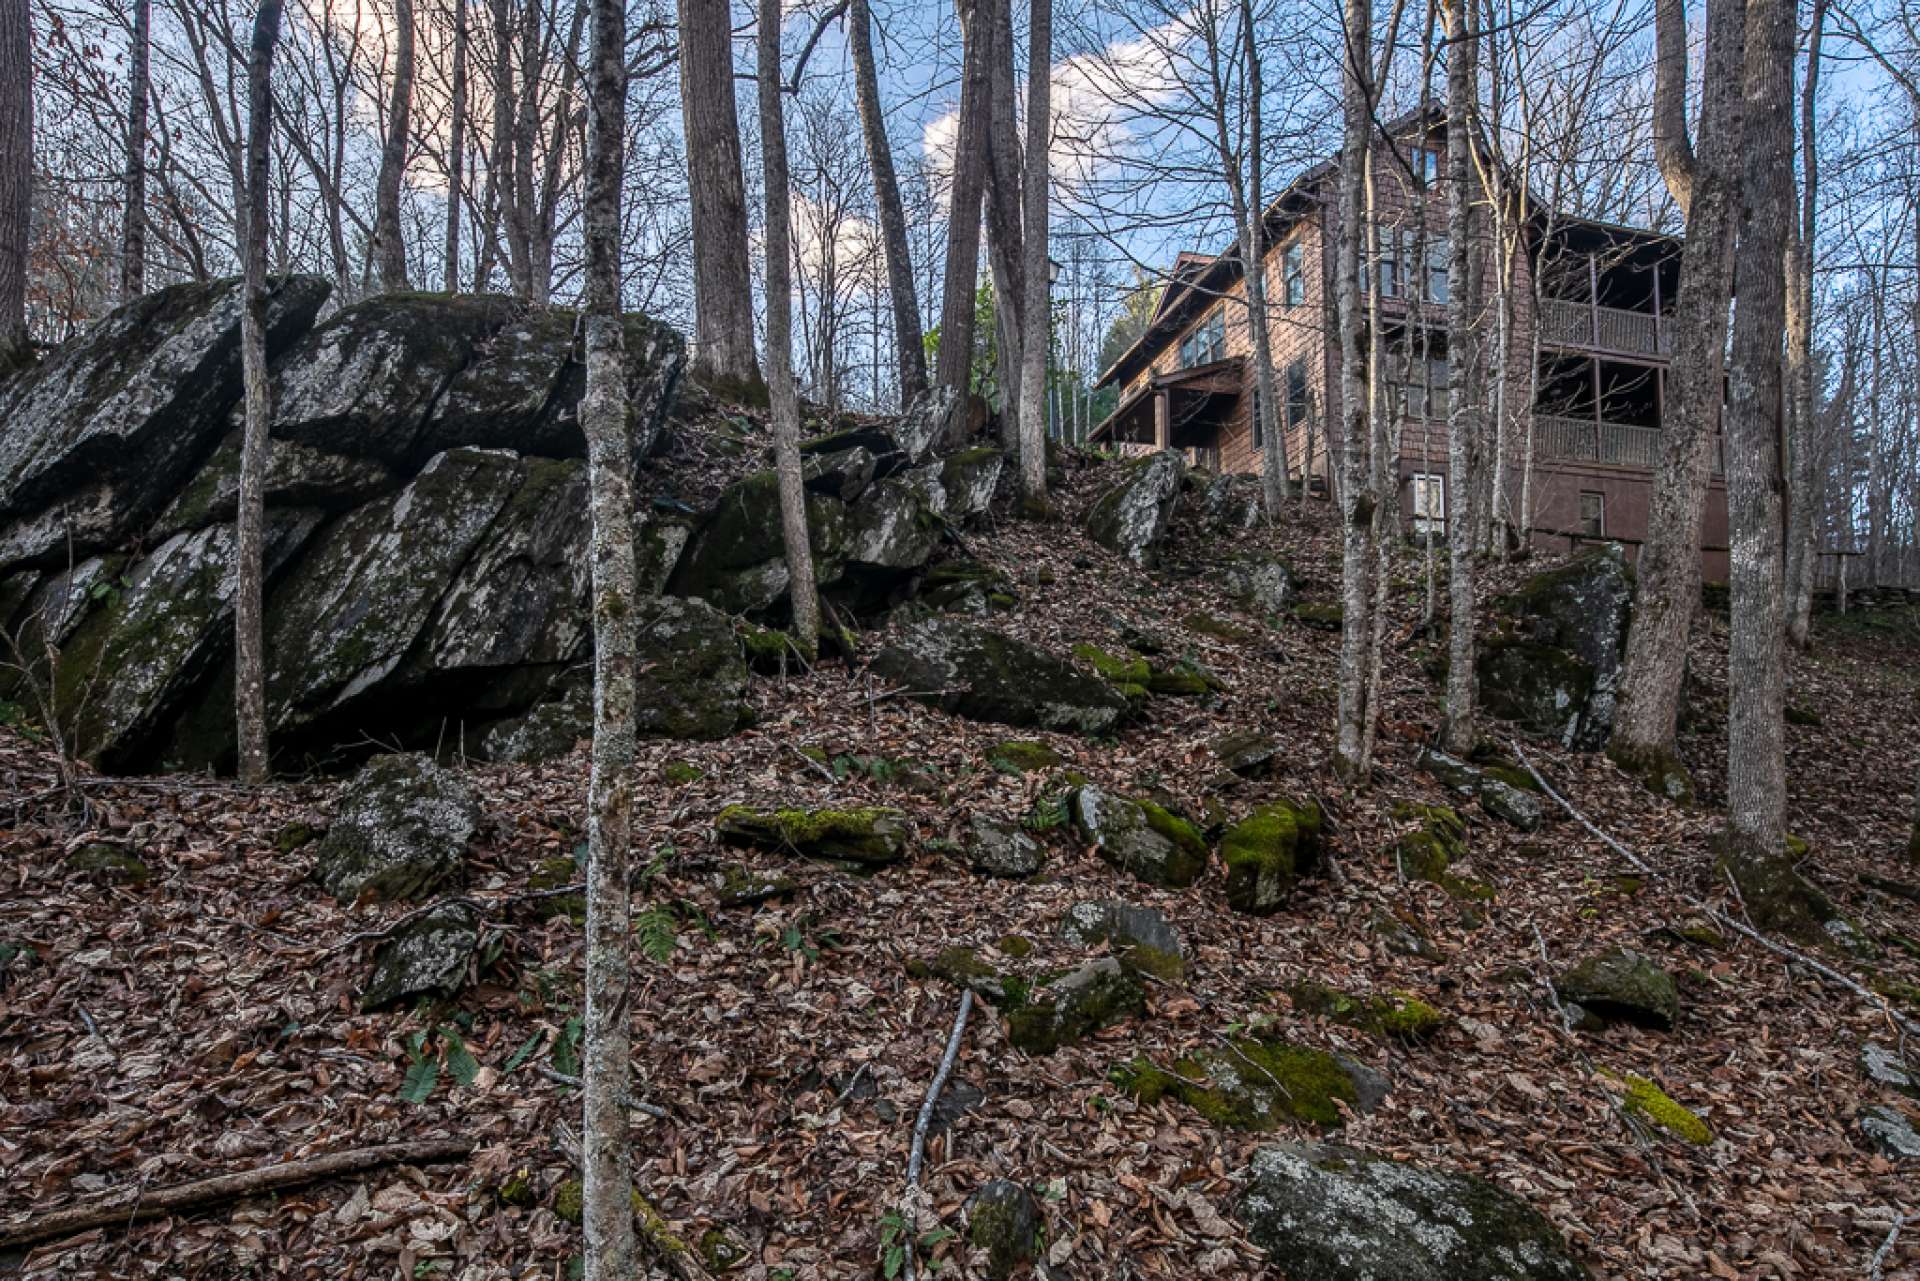 This photo was taken by the creek looking toward the house.  Notice the unique rock formations, just one of the many wonders awaiting you here.